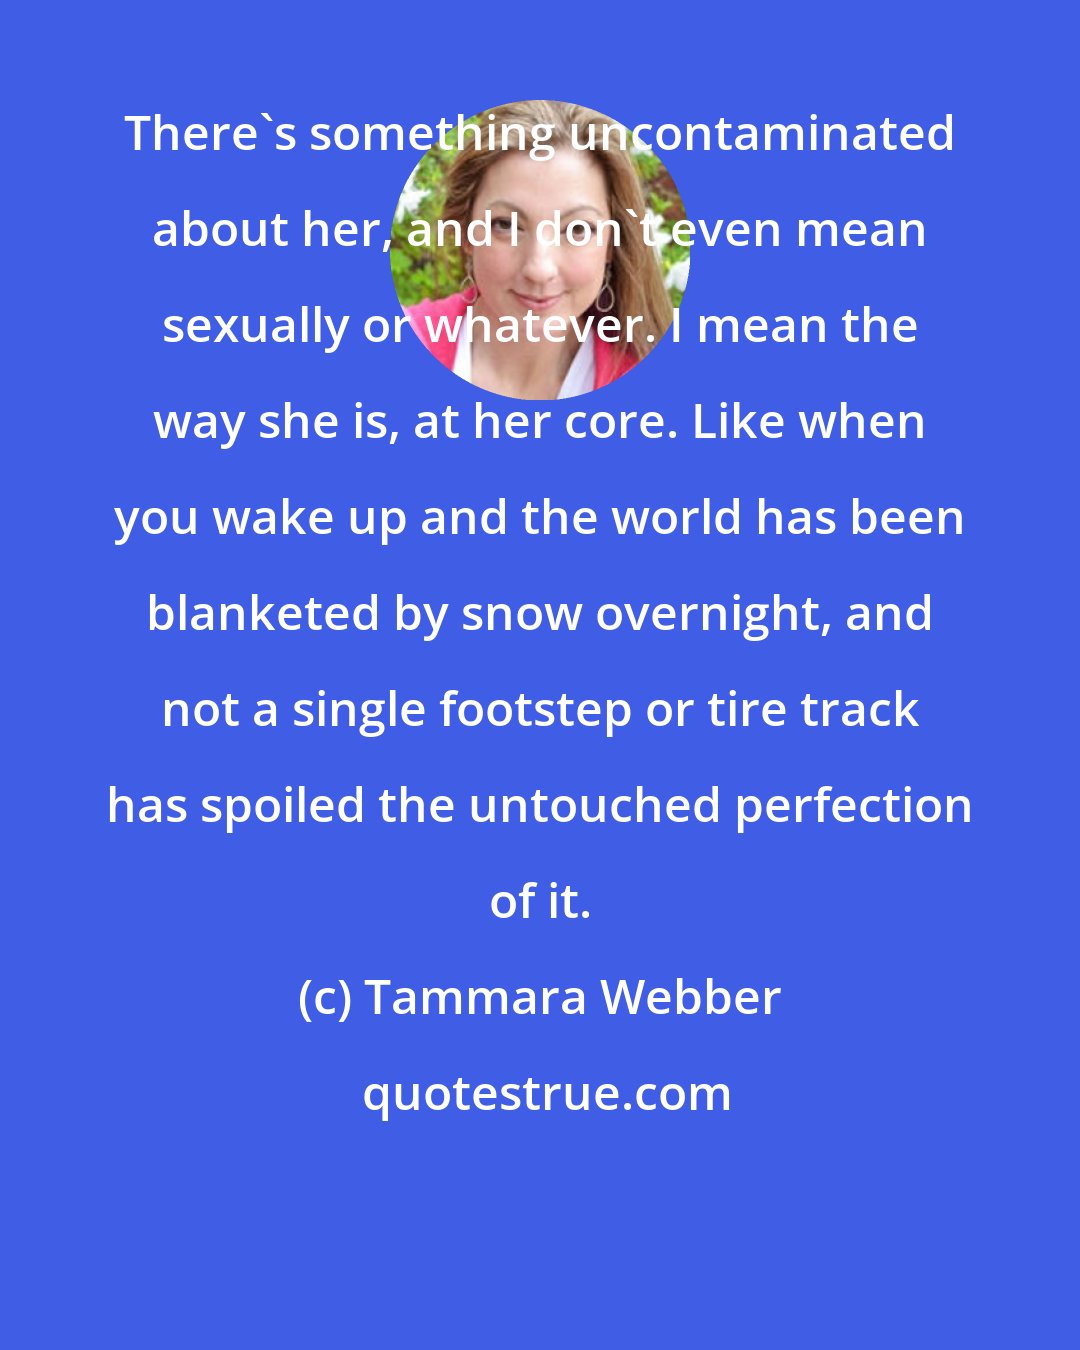 Tammara Webber: There's something uncontaminated about her, and I don't even mean sexually or whatever. I mean the way she is, at her core. Like when you wake up and the world has been blanketed by snow overnight, and not a single footstep or tire track has spoiled the untouched perfection of it.